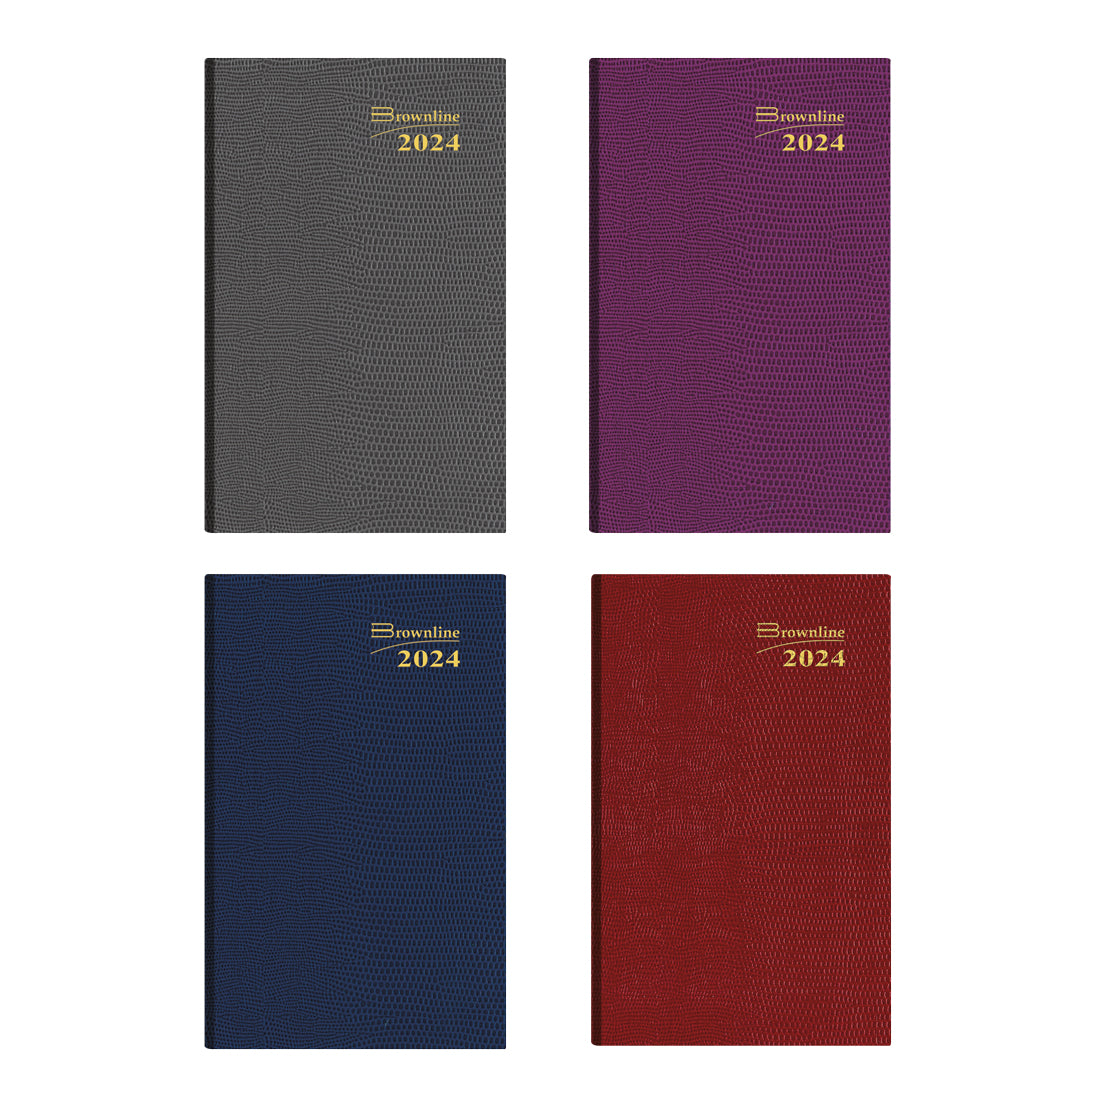 Weekly Pocket Planner 2024, Assorted colors